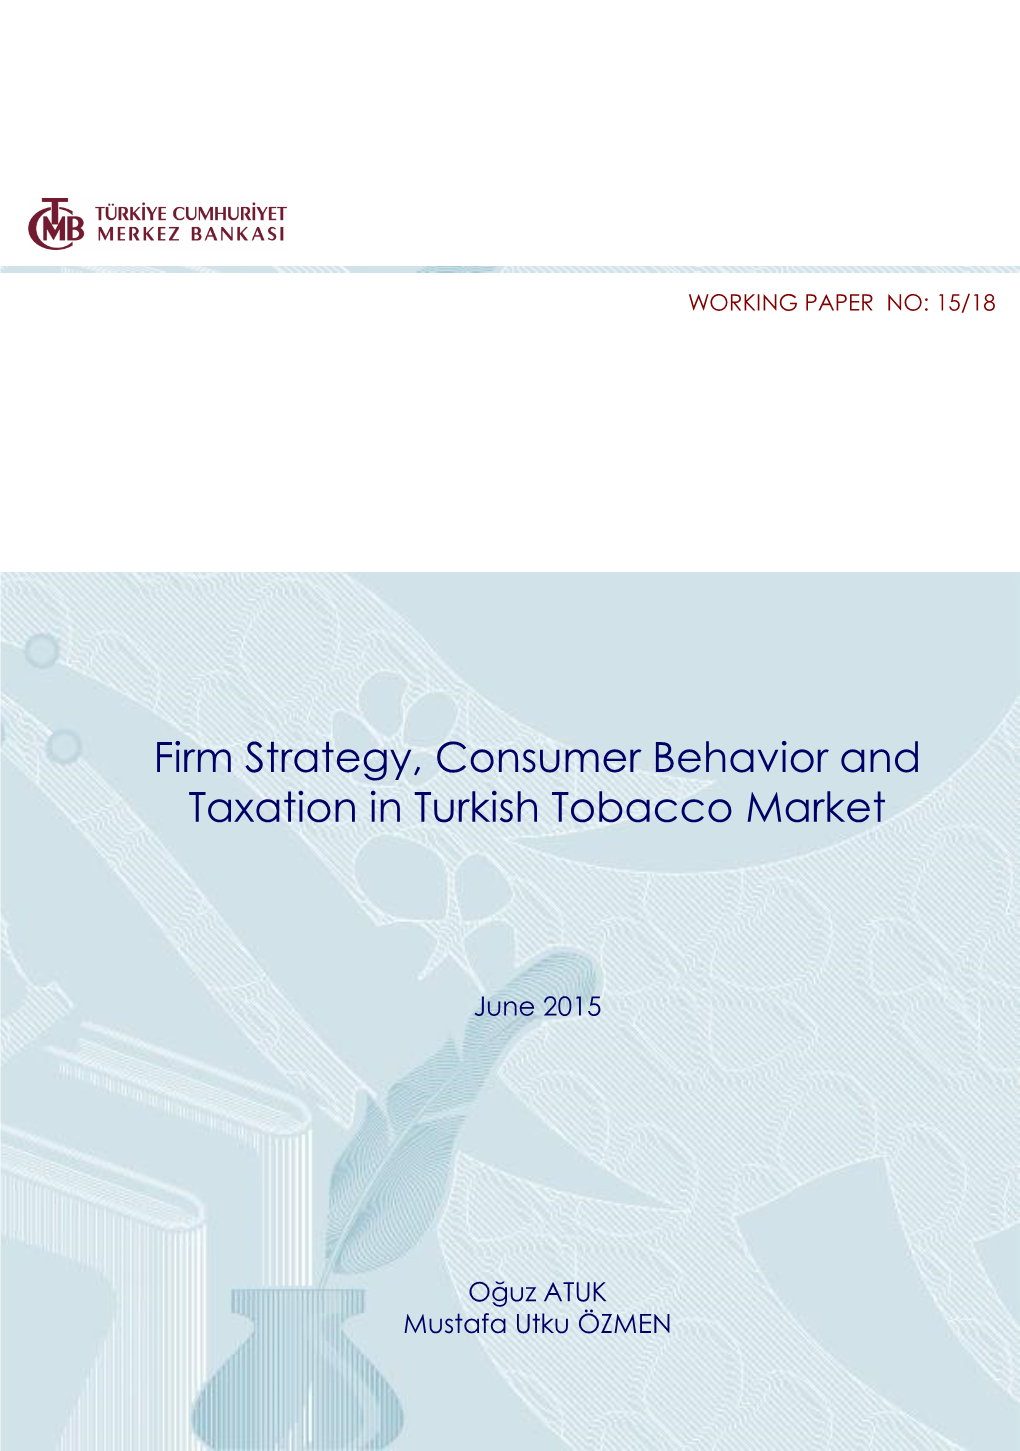 Firm Strategy, Consumer Behavior and Taxation in Turkish Tobacco Market